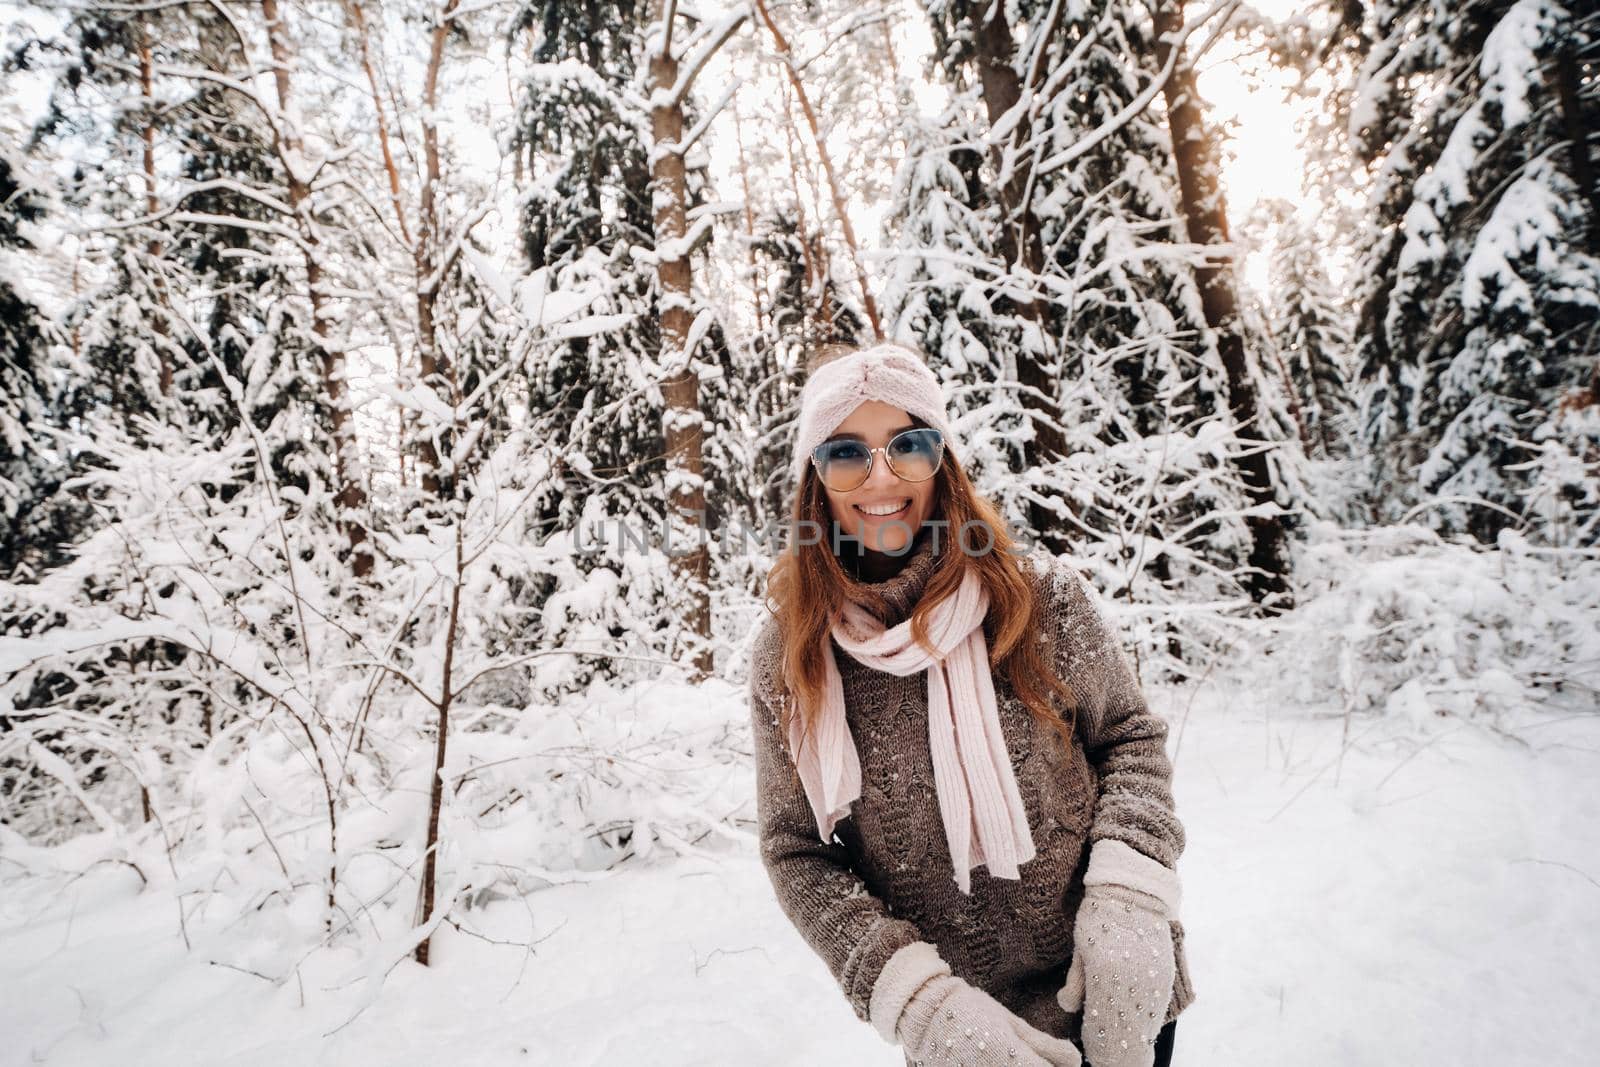 A girl in a sweater and glasses walks in the snow-covered forest in winter by Lobachad